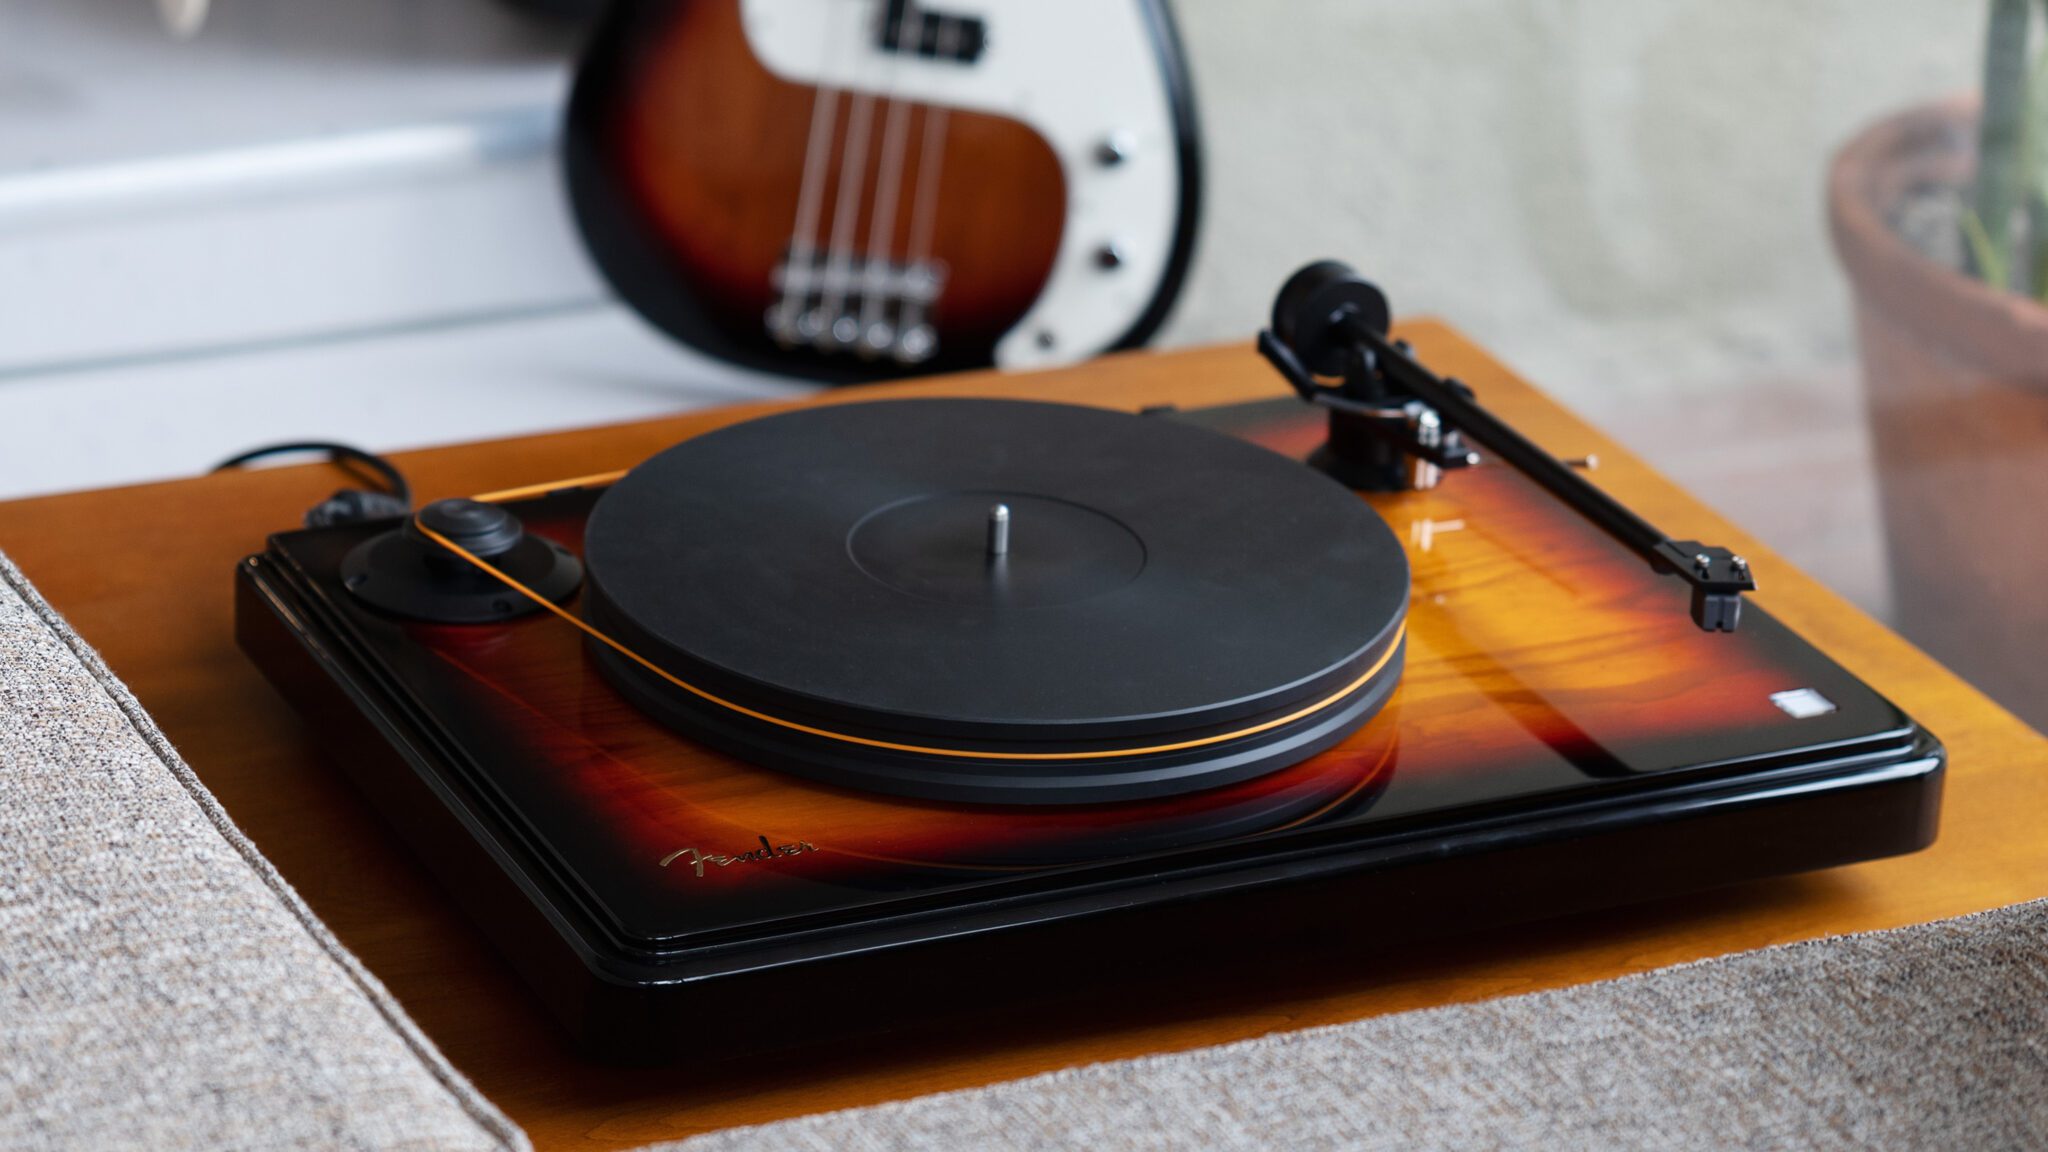 FENDER X MOFI PRECISIONDECK LIMITED EDITION TURNTABLE